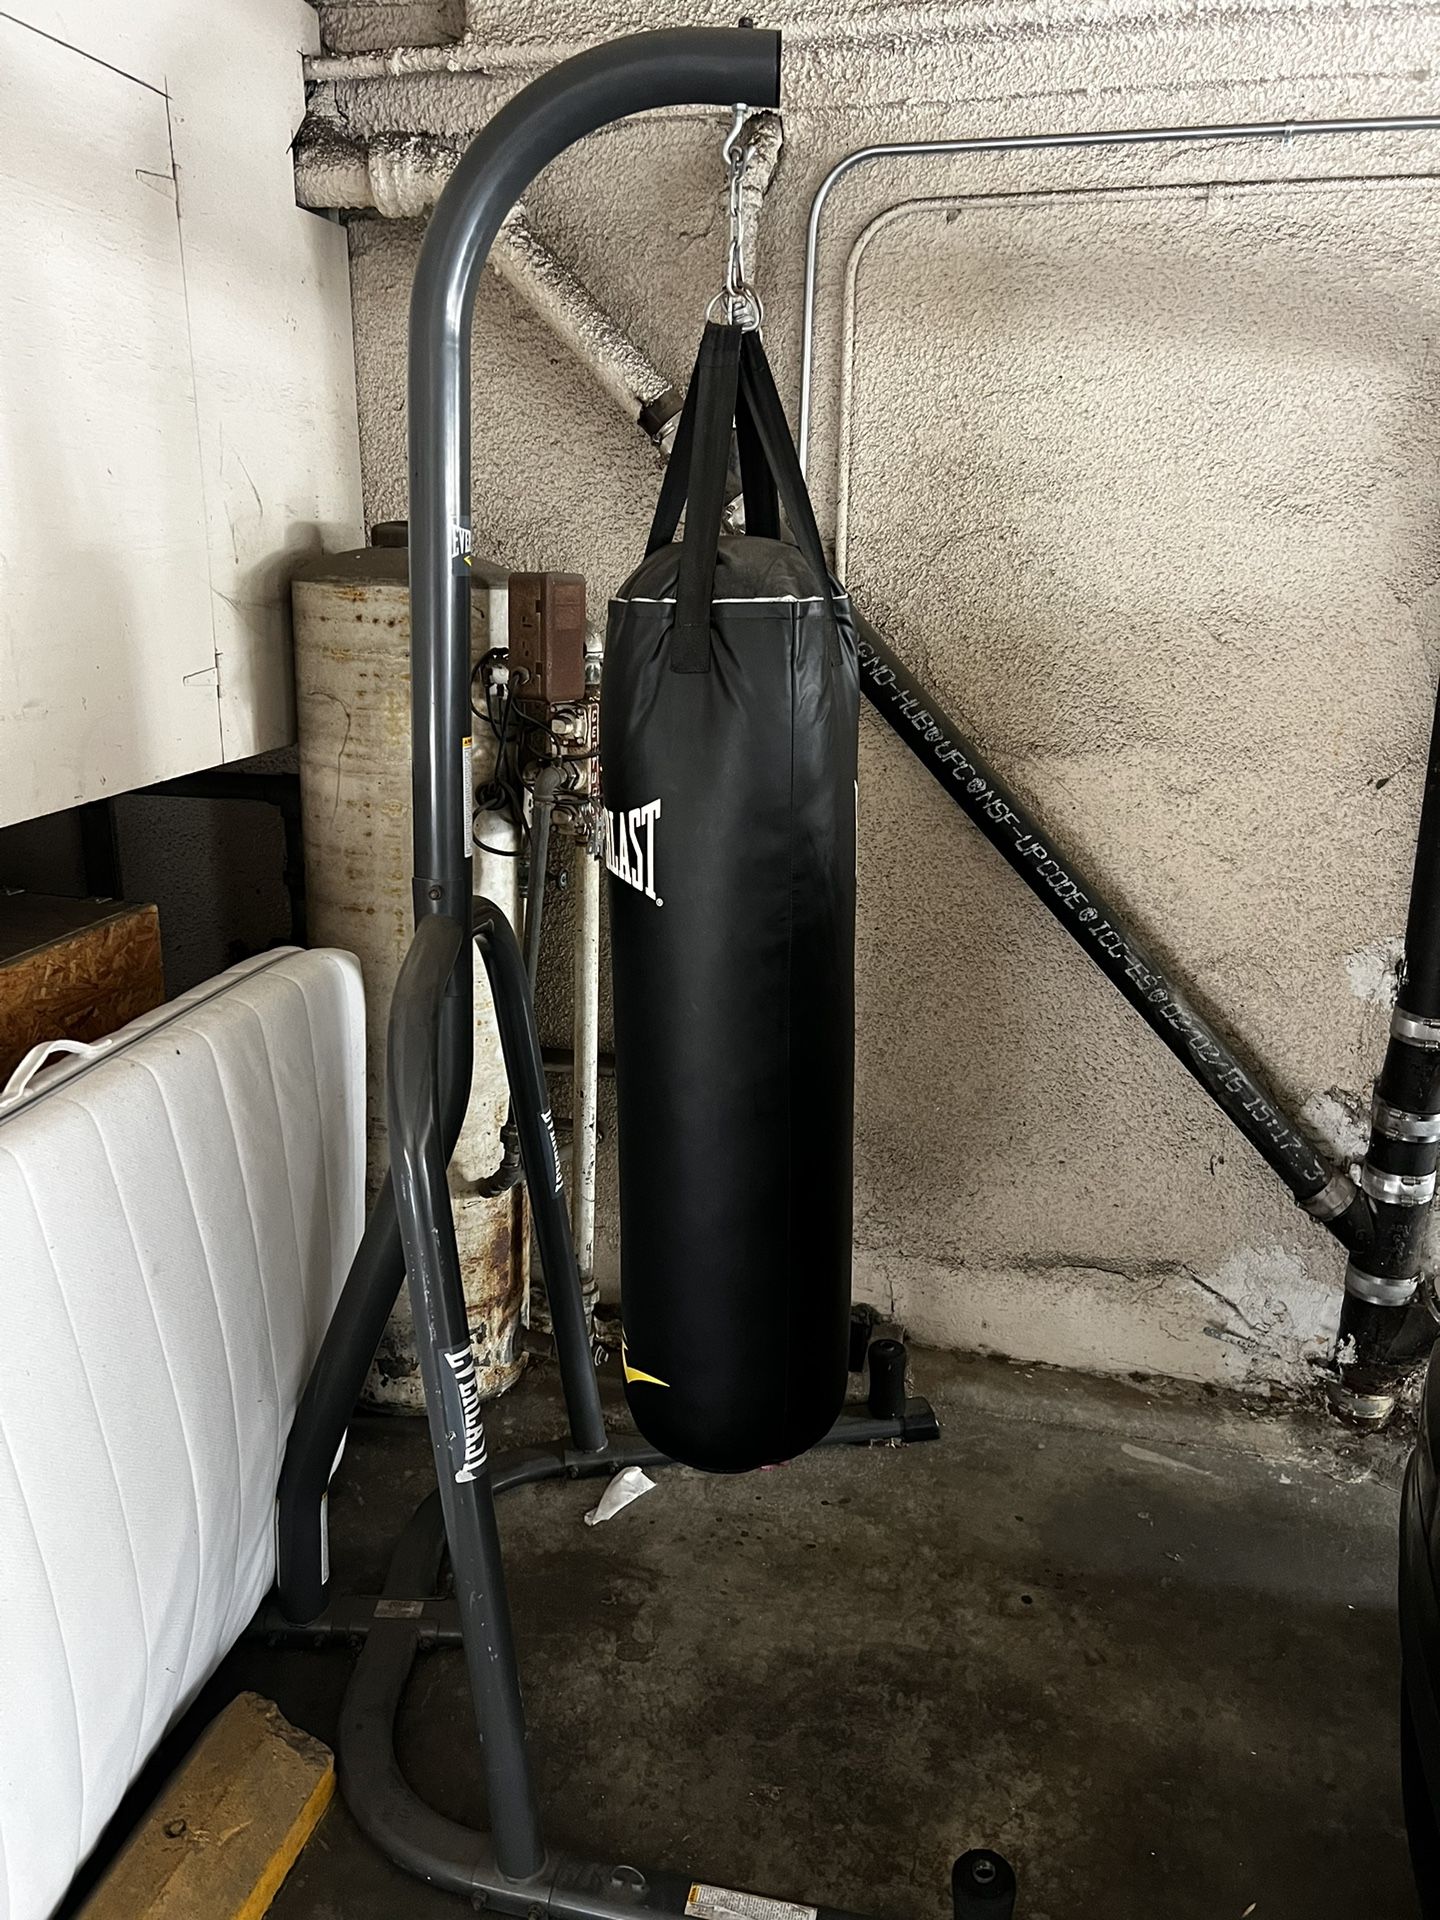 Everlast Punching Bag & Stand